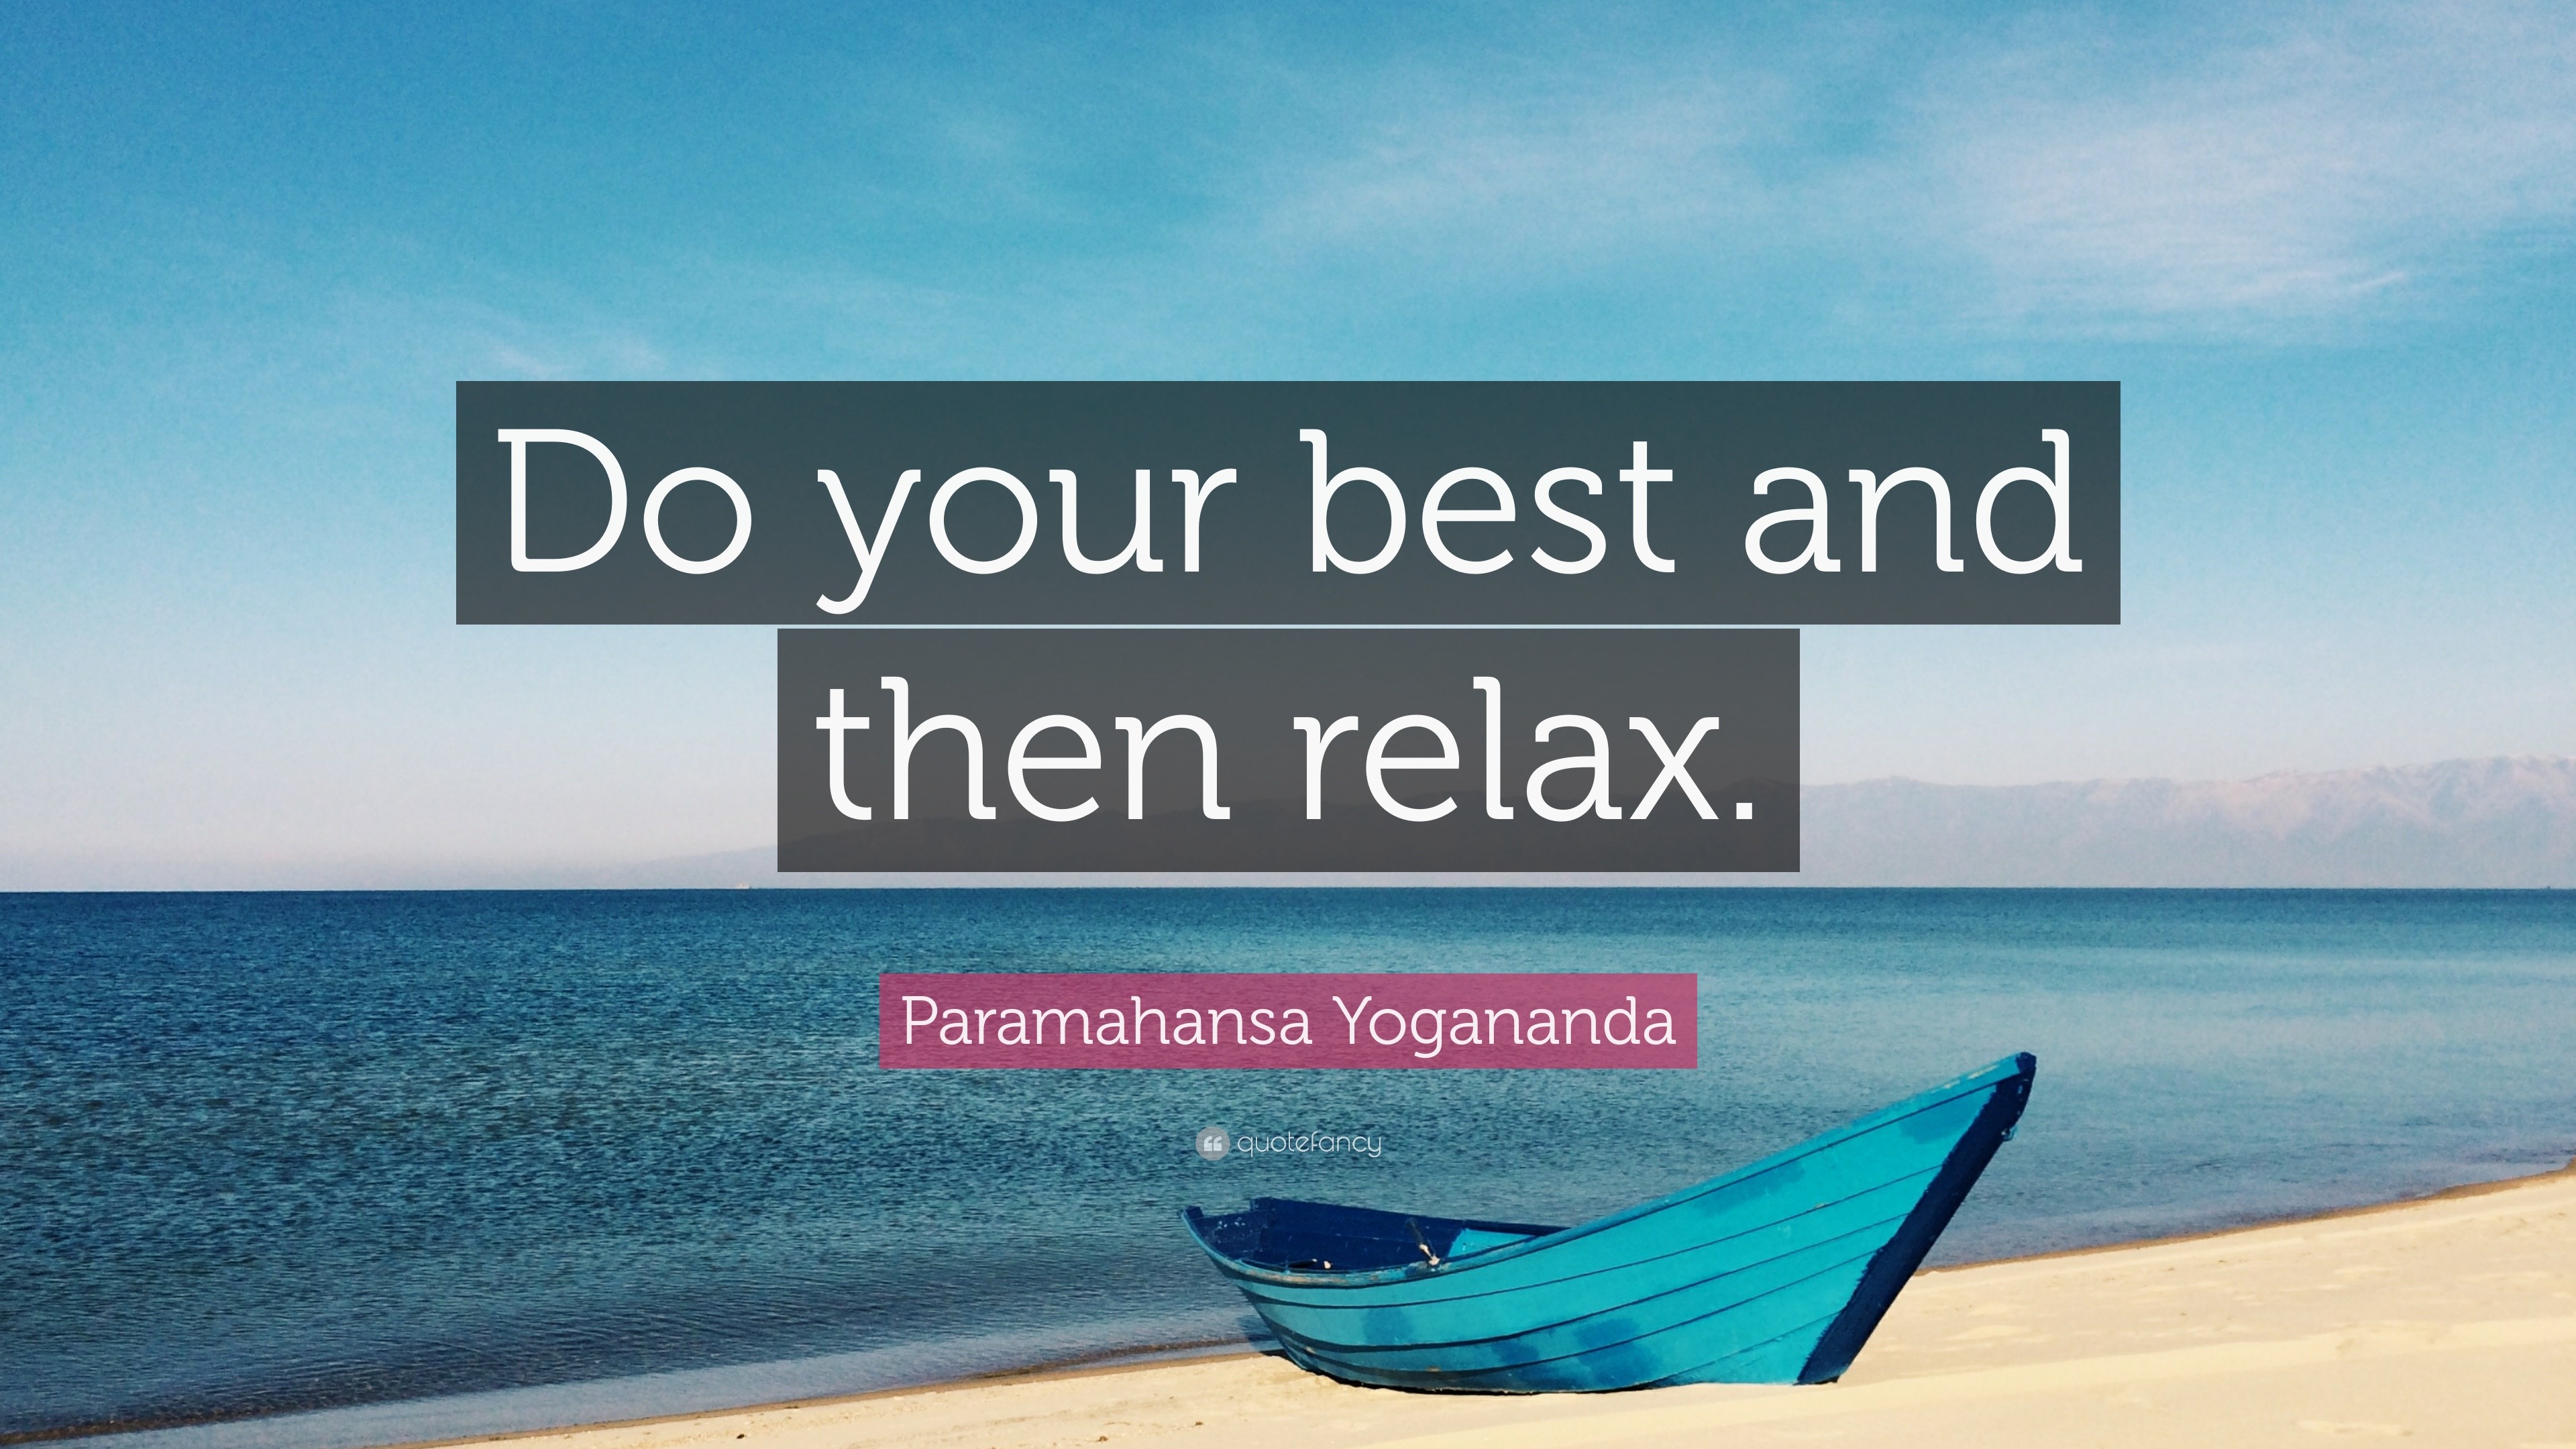 1731397 Paramahansa Yogananda Quote Do your best and then